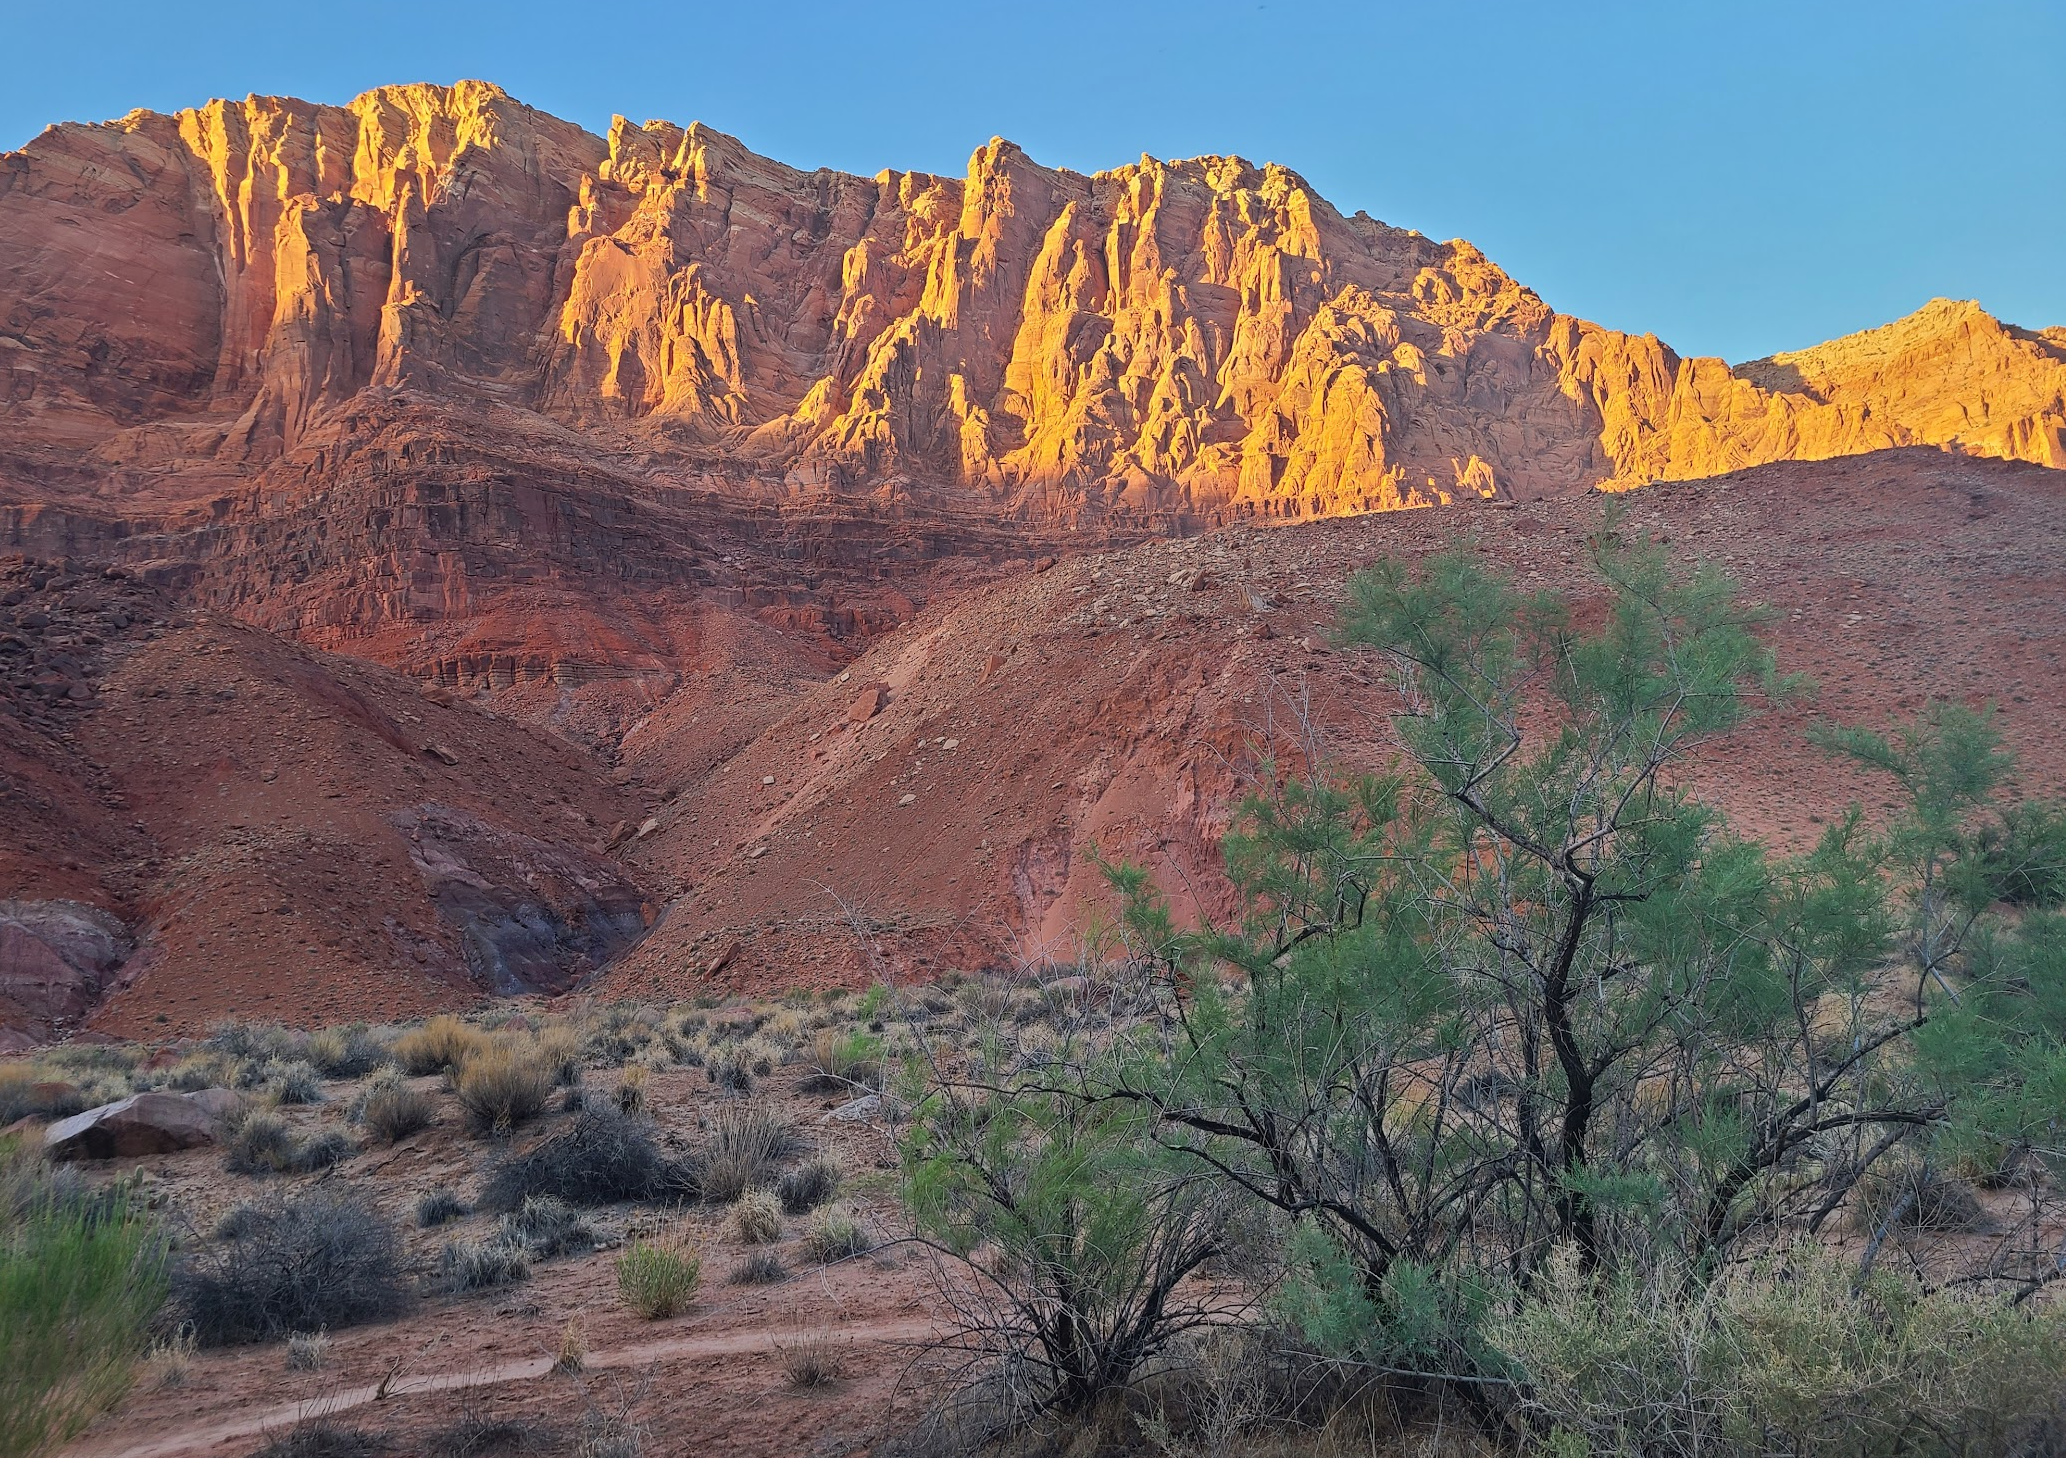 Camper submitted image from Paria Canyon Wilderness - Final Designated Campsite Before Lee's Ferry - 2